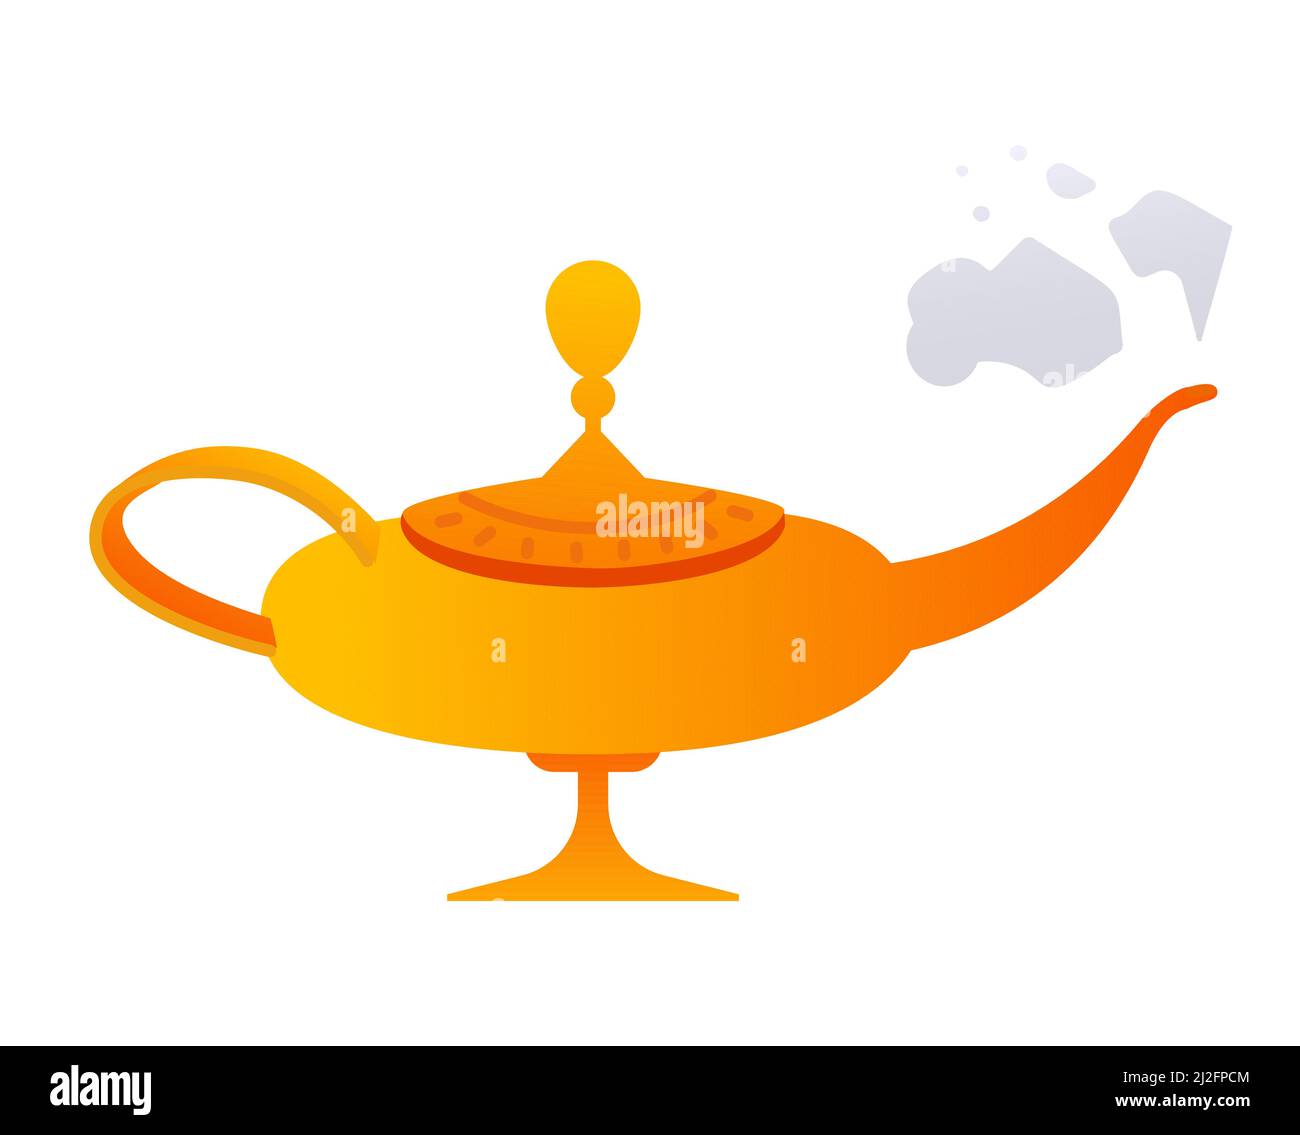 Magic lamp - modern flat design style single isolated object Stock Vector